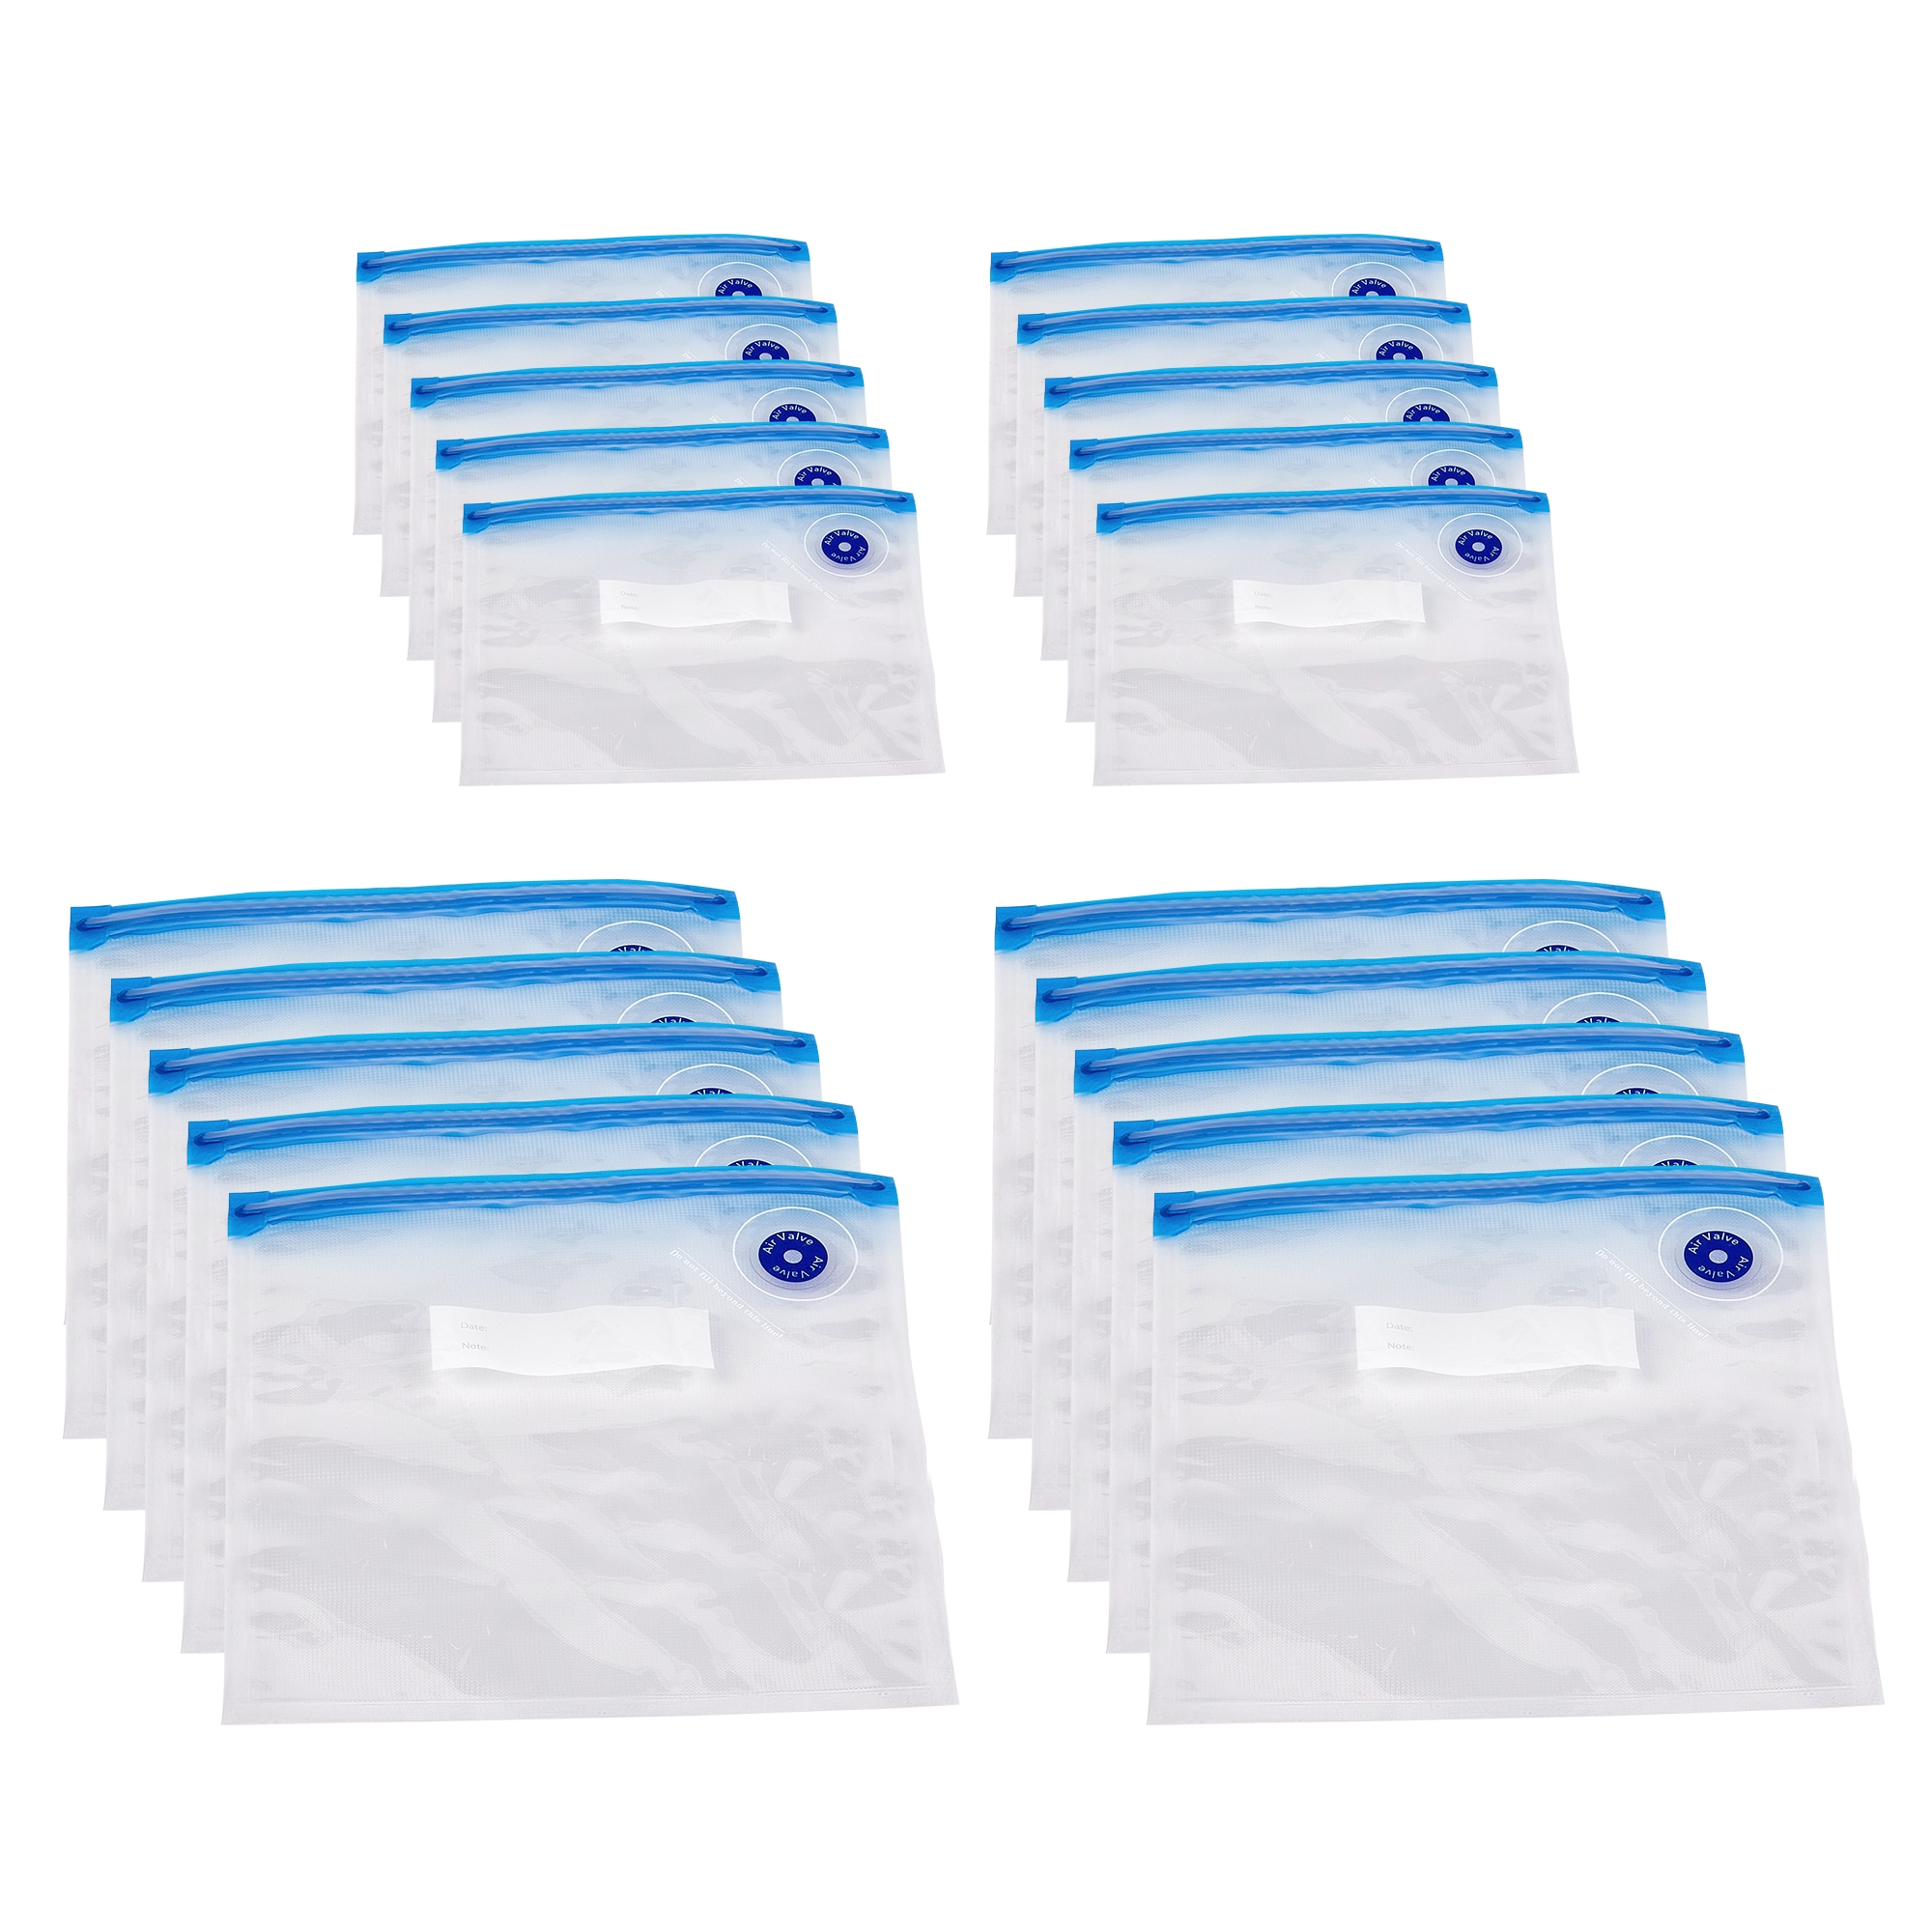 These Vacuum Seal Bags Are on Sale for $20